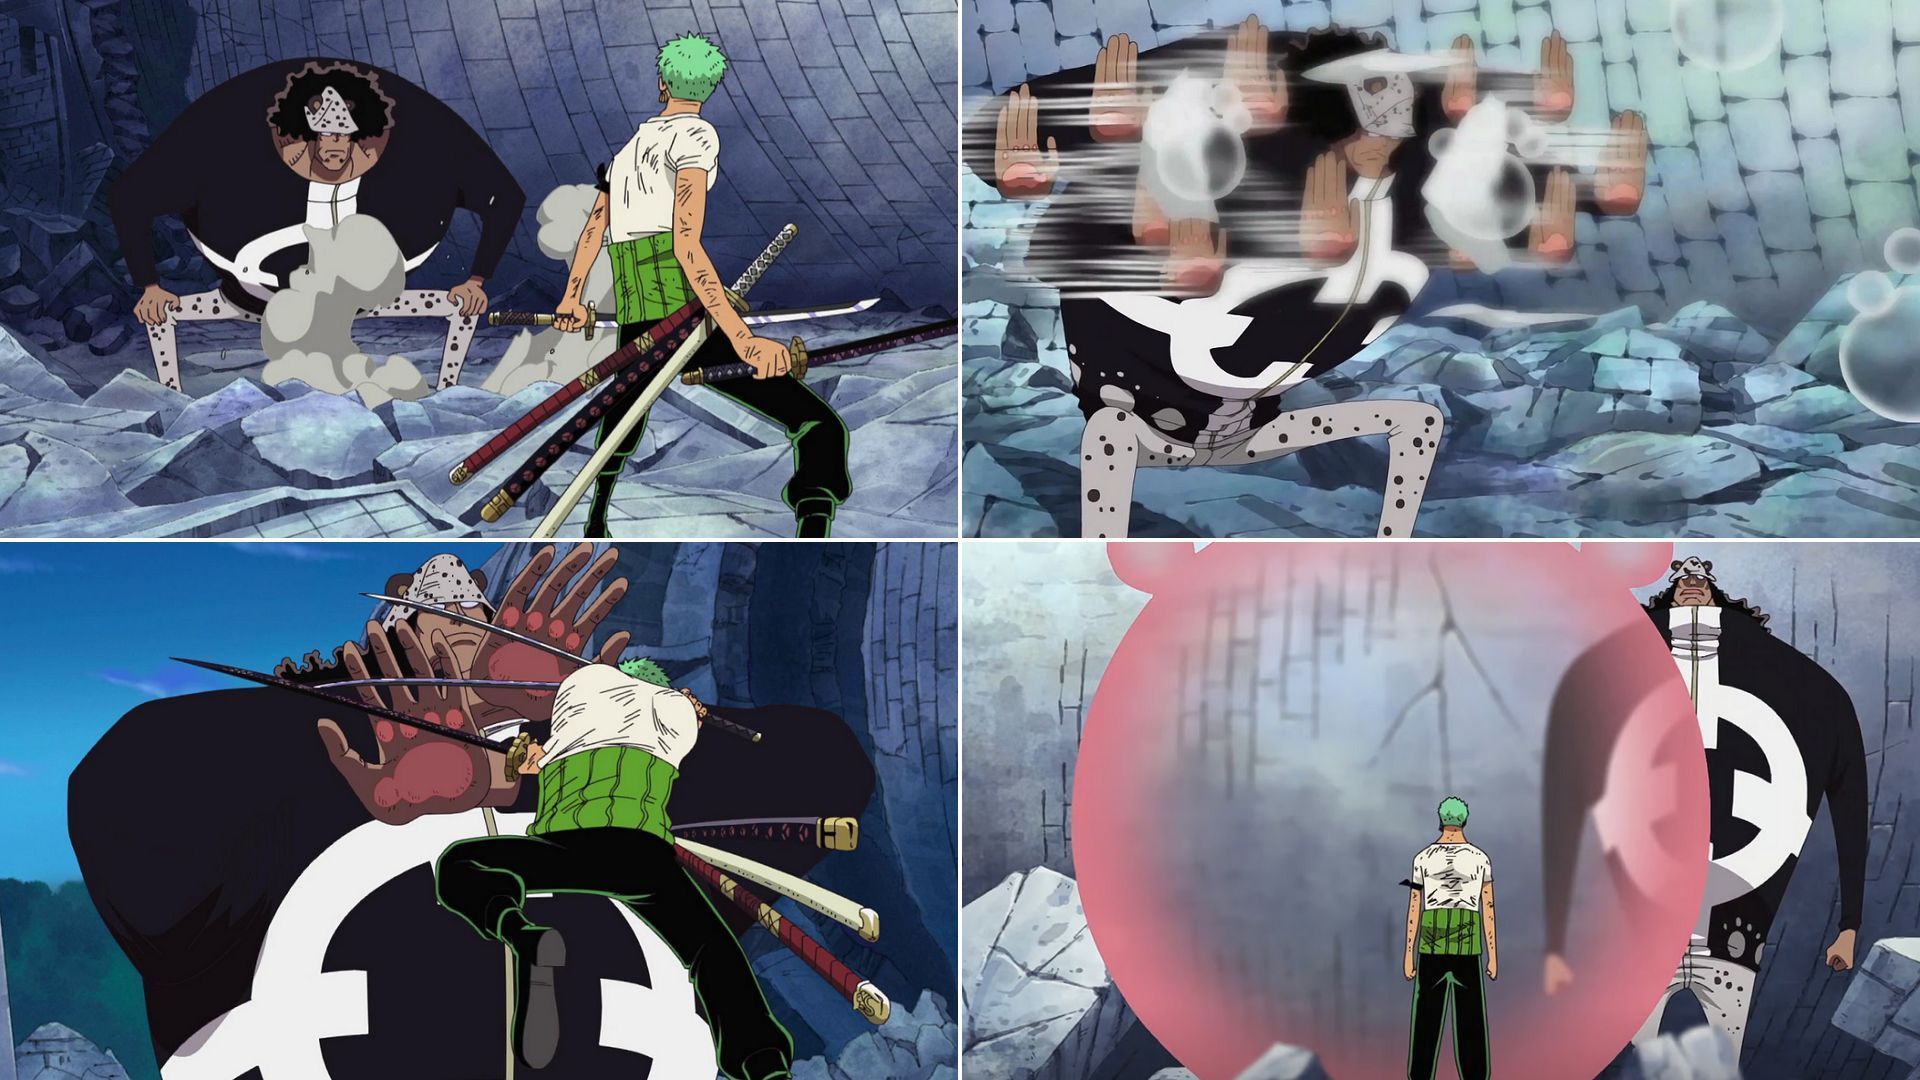 Kuma using his Devil Fruit powers in the fight against Zoro (Image via Toei Animation, One Piece)